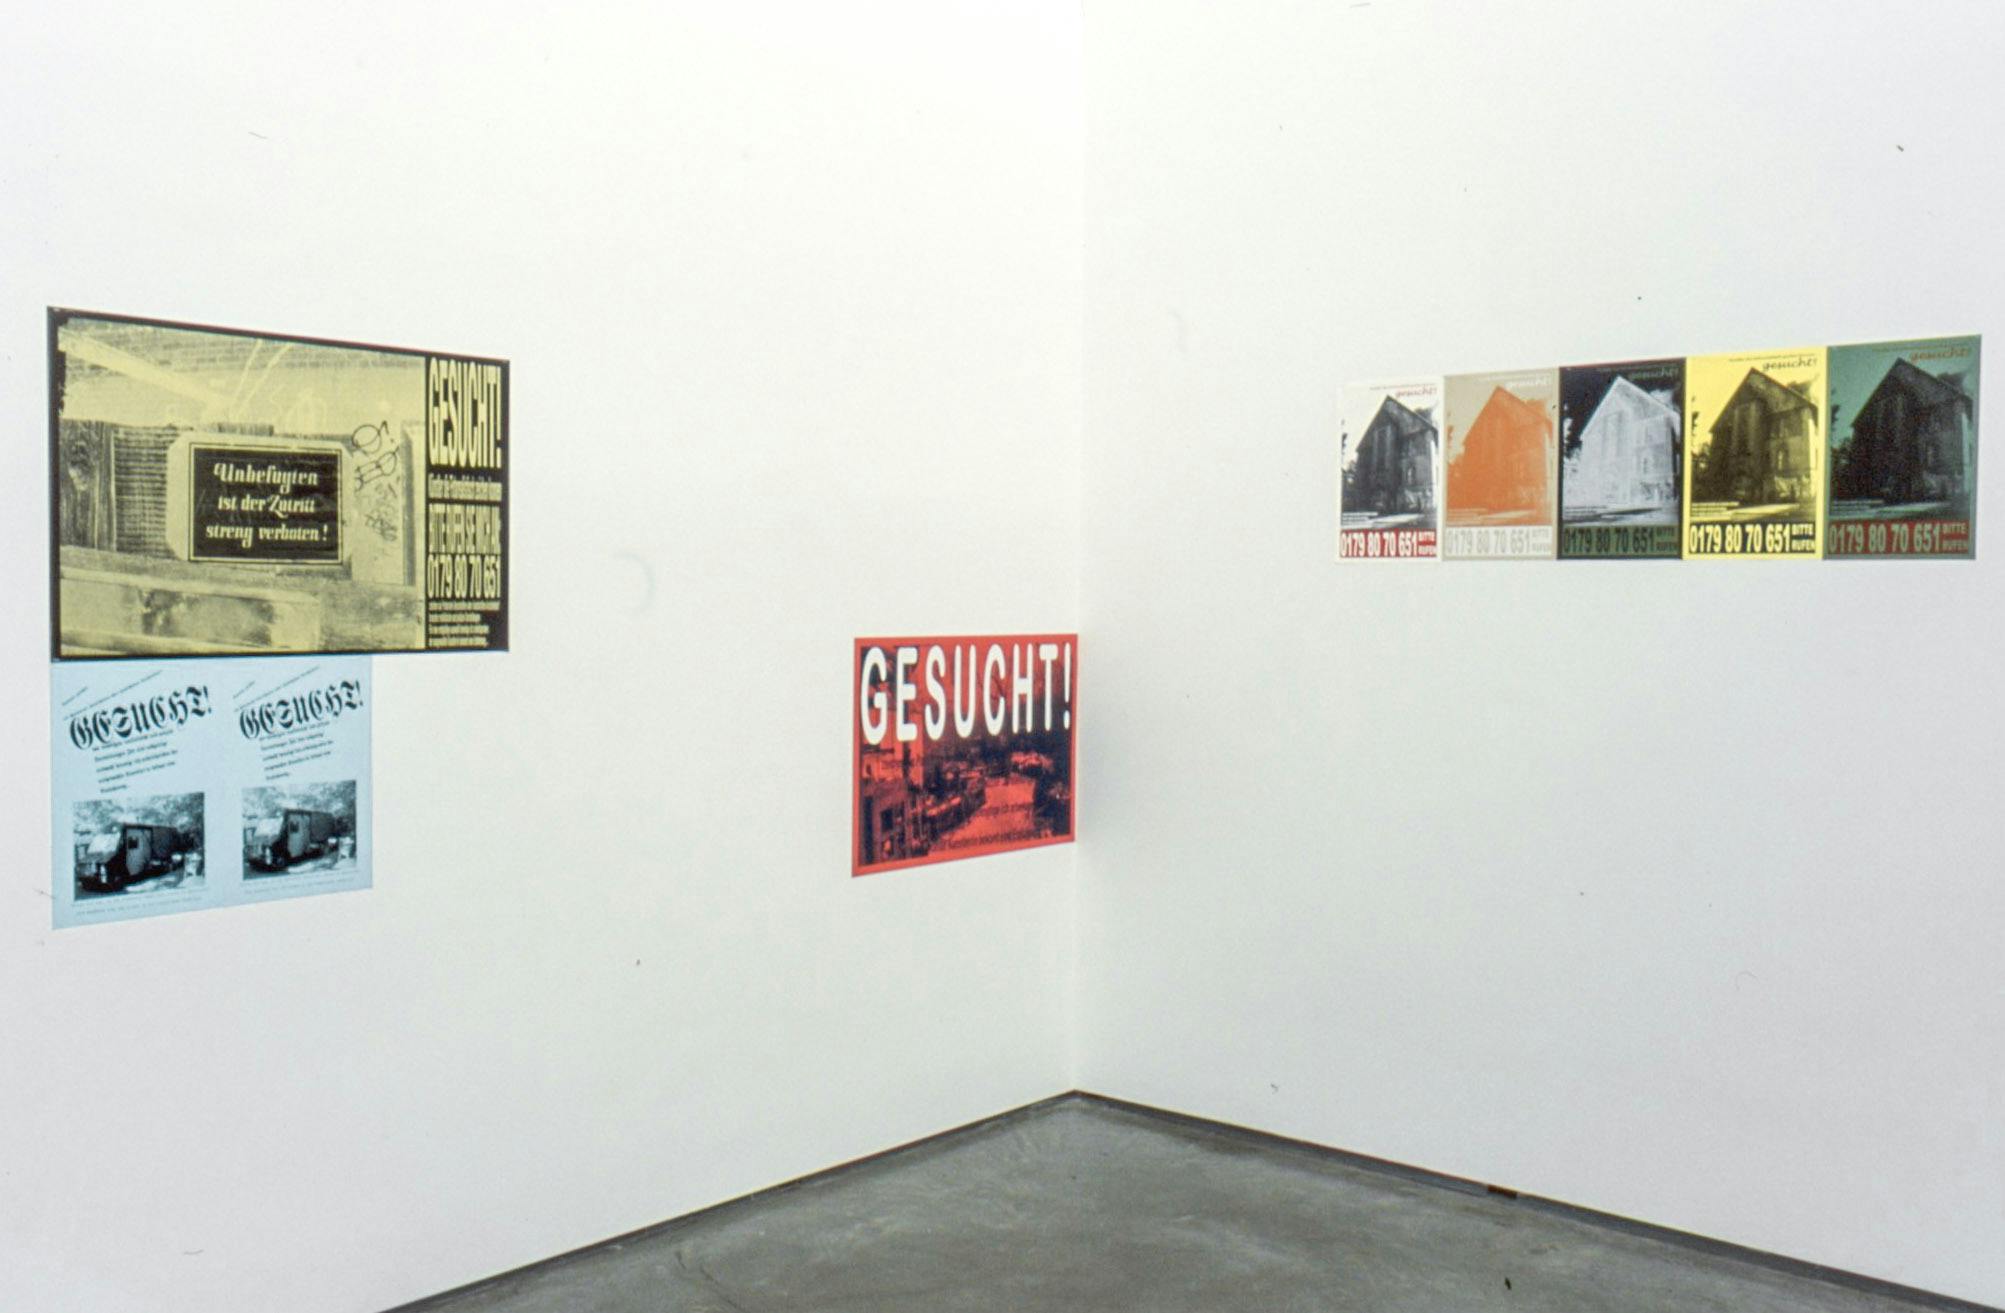 Installation image of posters. Five various-sized posters are mounted on the walls. The posters are coloured red, yellow, green, and light blue. Some of them are black and white. One poster shows the word “gesucht!” in all capital letters. 